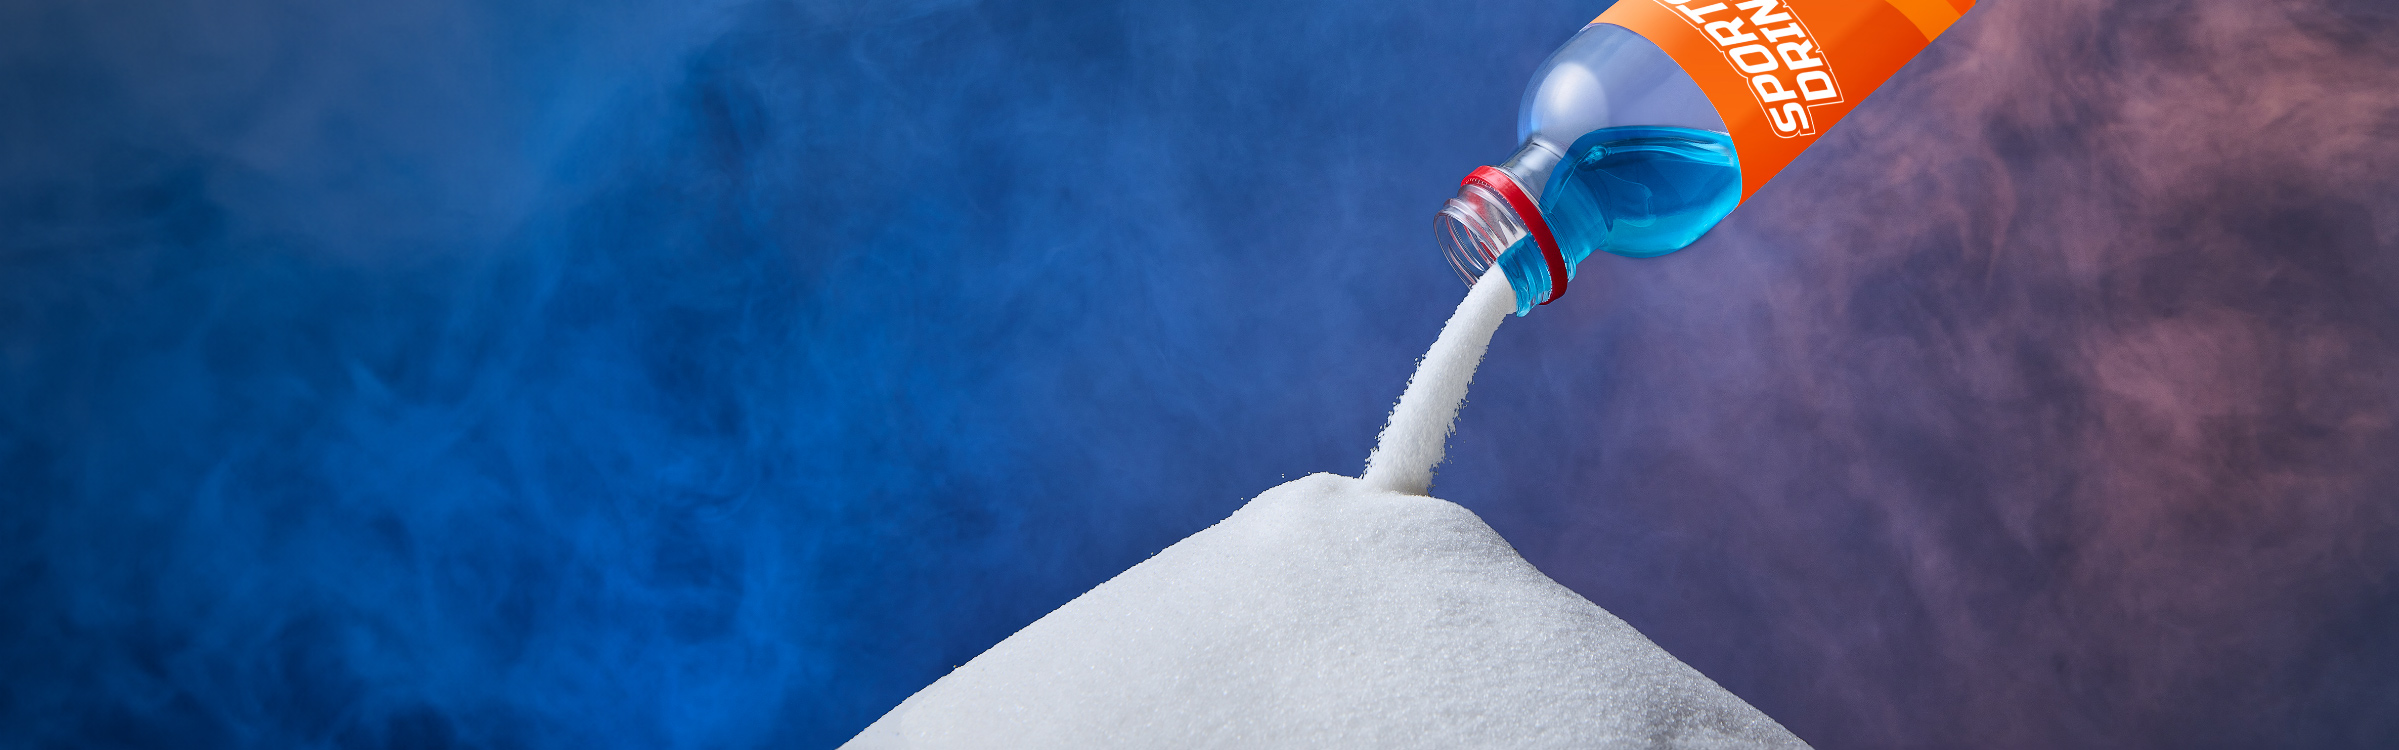 A stream of sugar is being poured onto a pile of sugar.